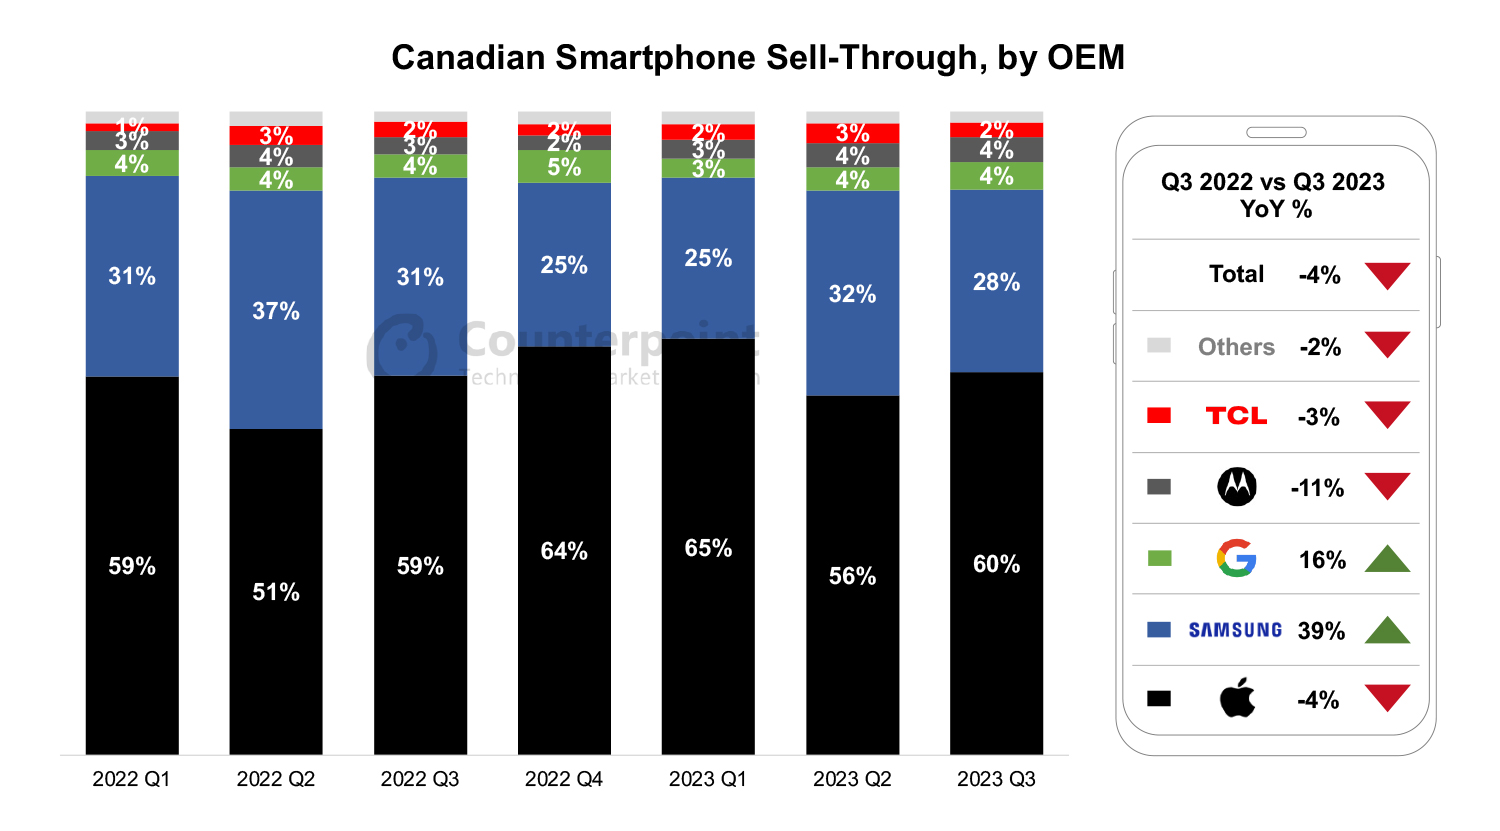 A chart showing Canada Smartphone Sell-through by OEM